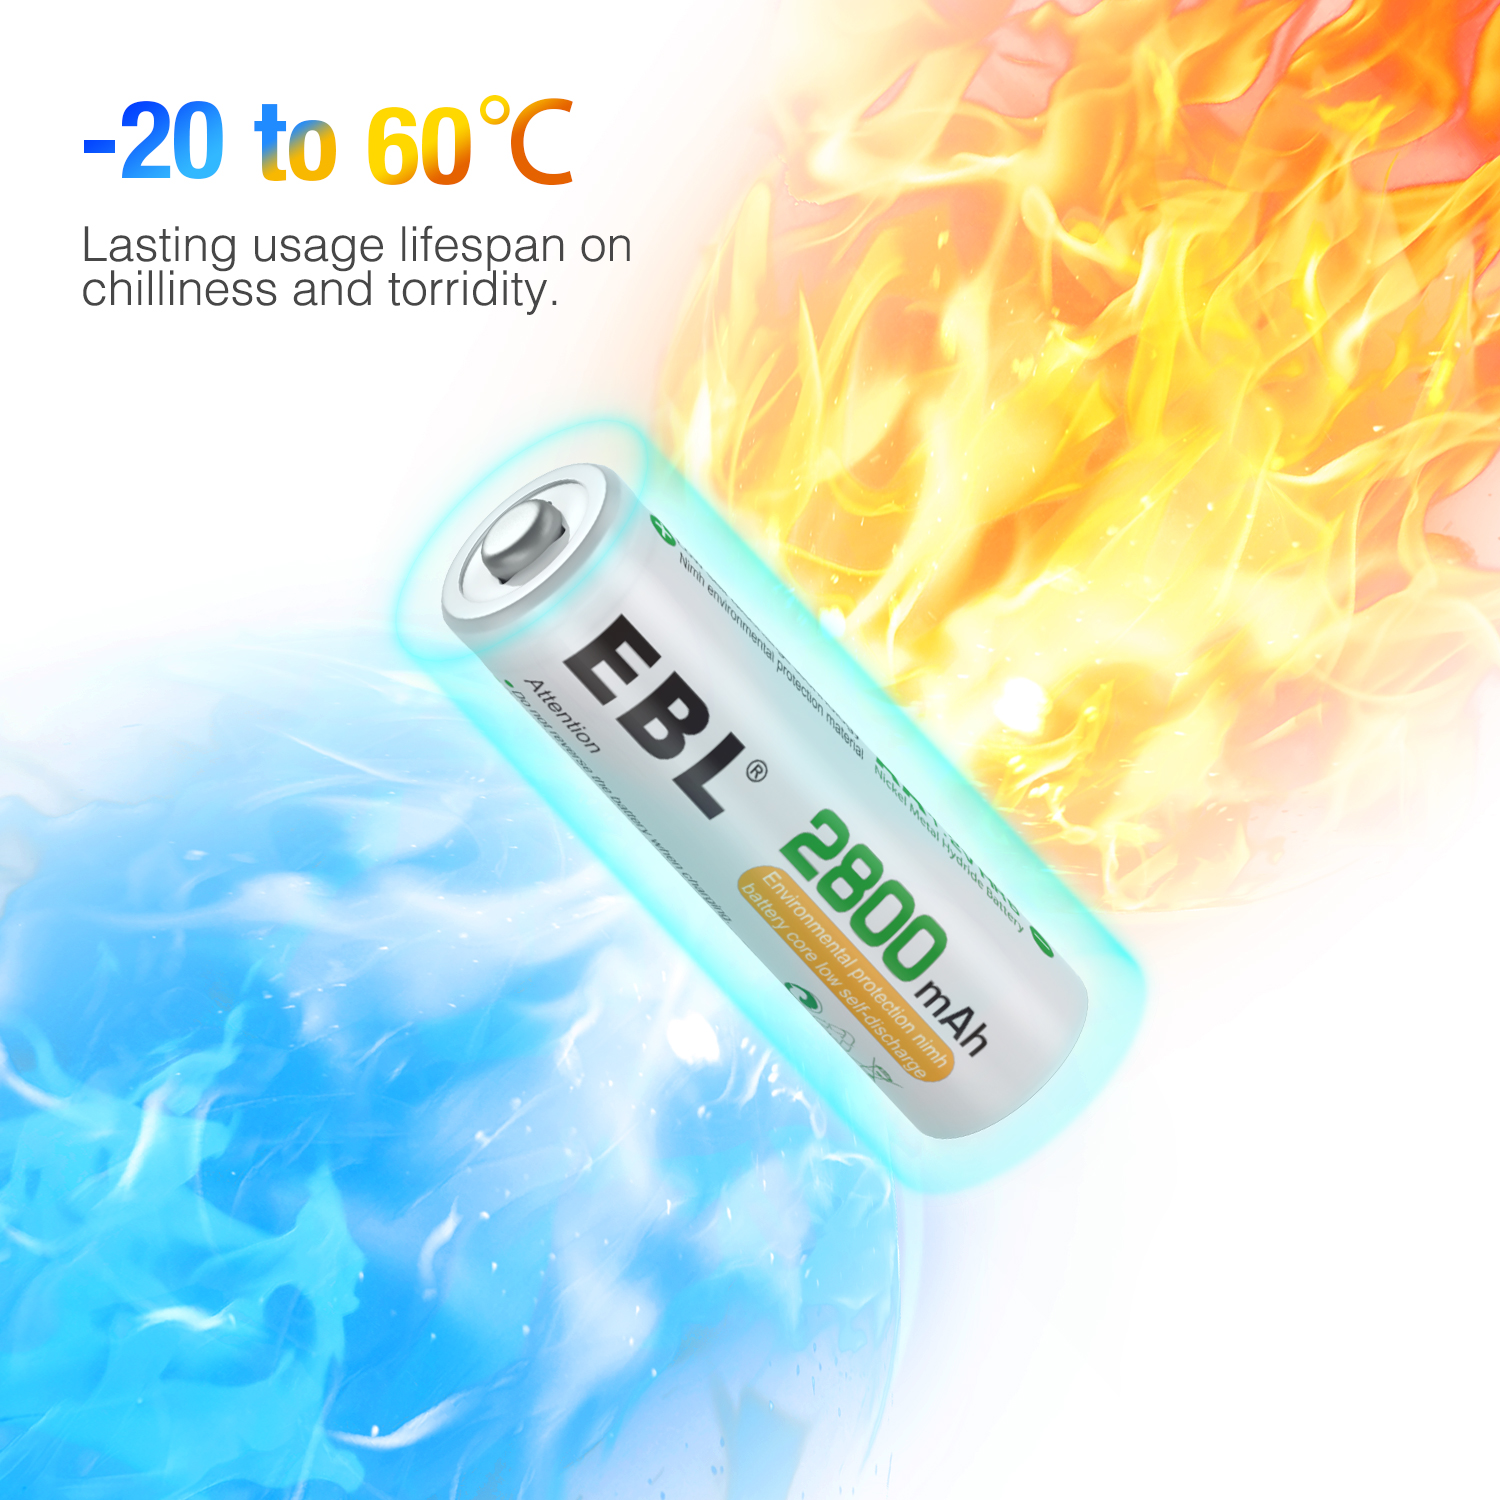 Battery works in enviroment from -20 to 60 degrees Celsius